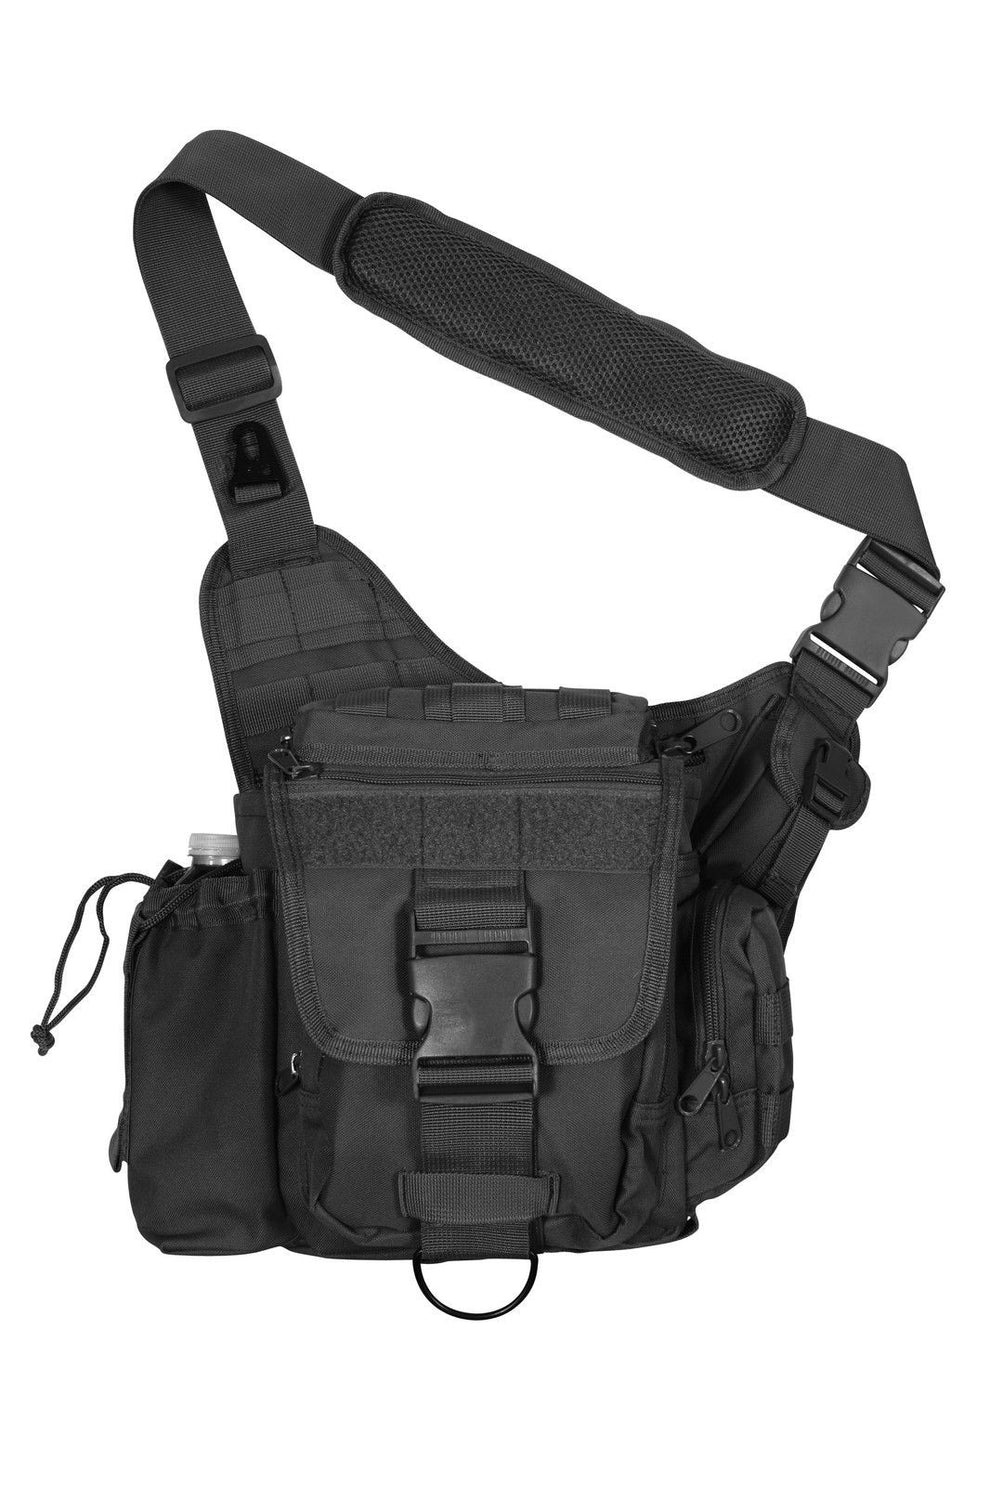 Advanced Tactical Shoulder Hip Bag - MOLLE Compatible with Cell Phone ...